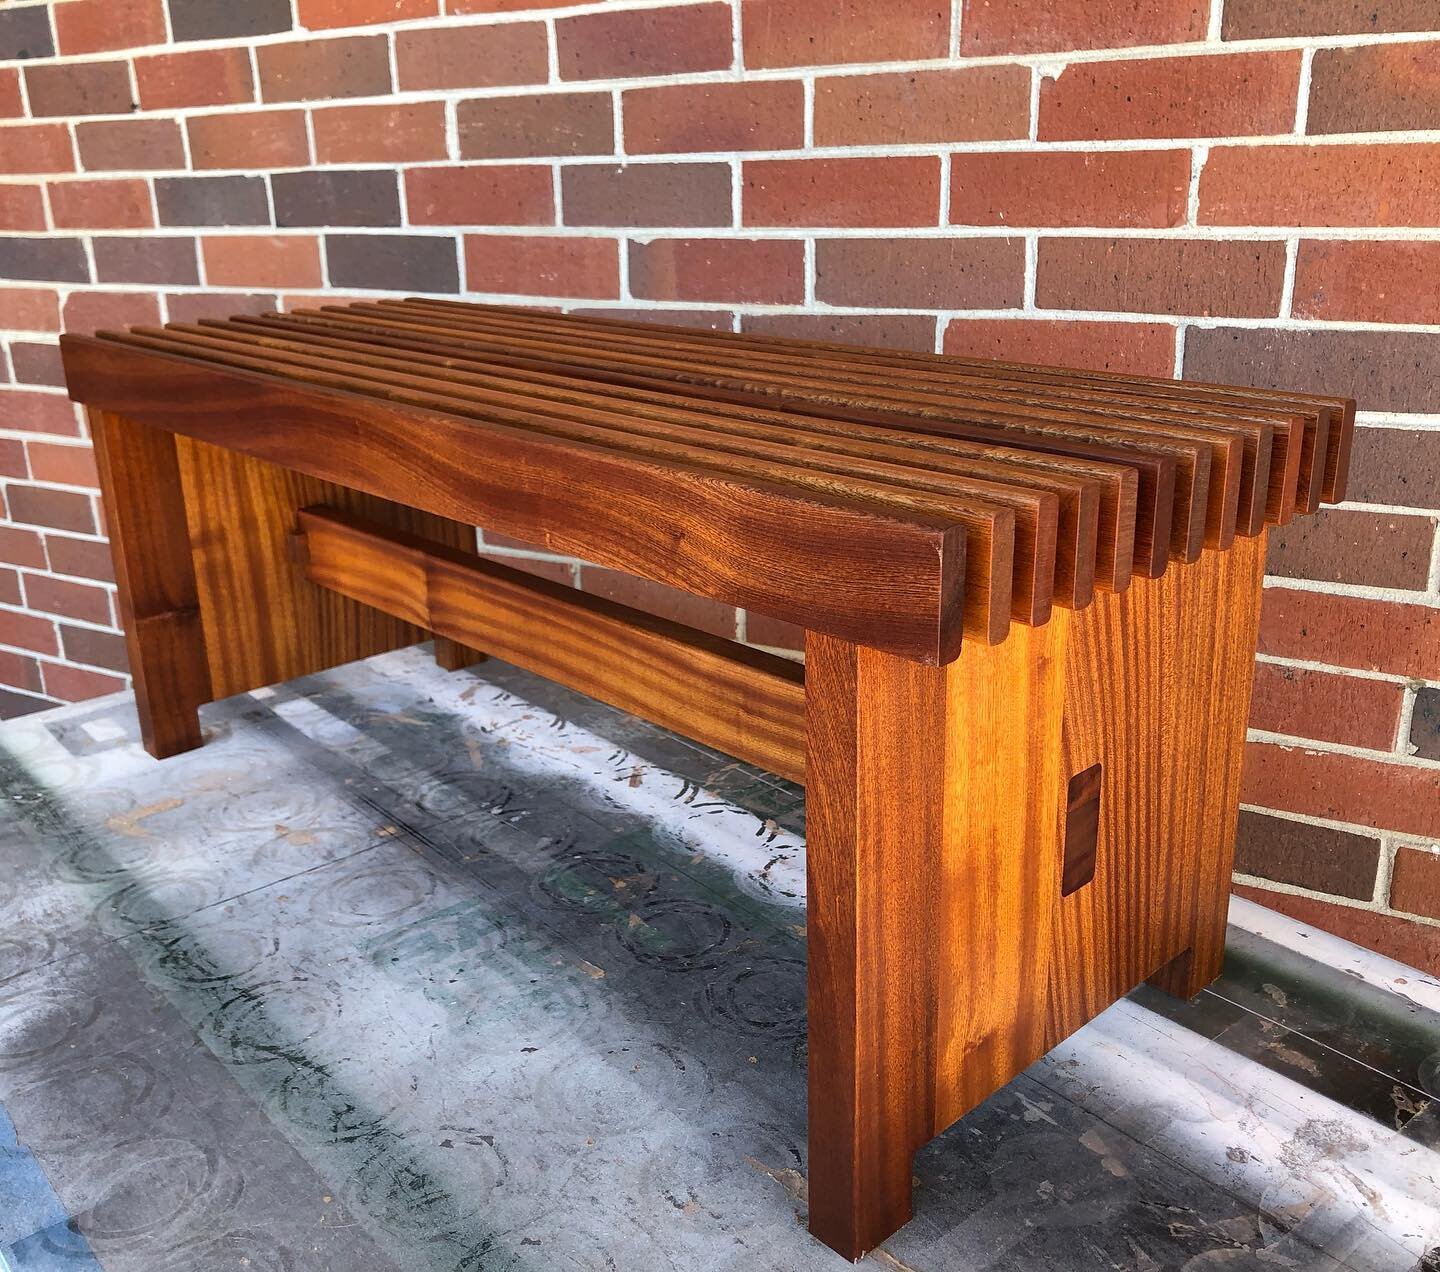 That&rsquo;s a wrap on these custom sapele slat benches. Can&rsquo;t wait to see them in their new home soon. 
.
.
#meadorsmillwork #meadorsinc #meadorscabinetryandmillwork #buildingcharleston #repitition #woodworkingwoman #customwoodwork #millwork #